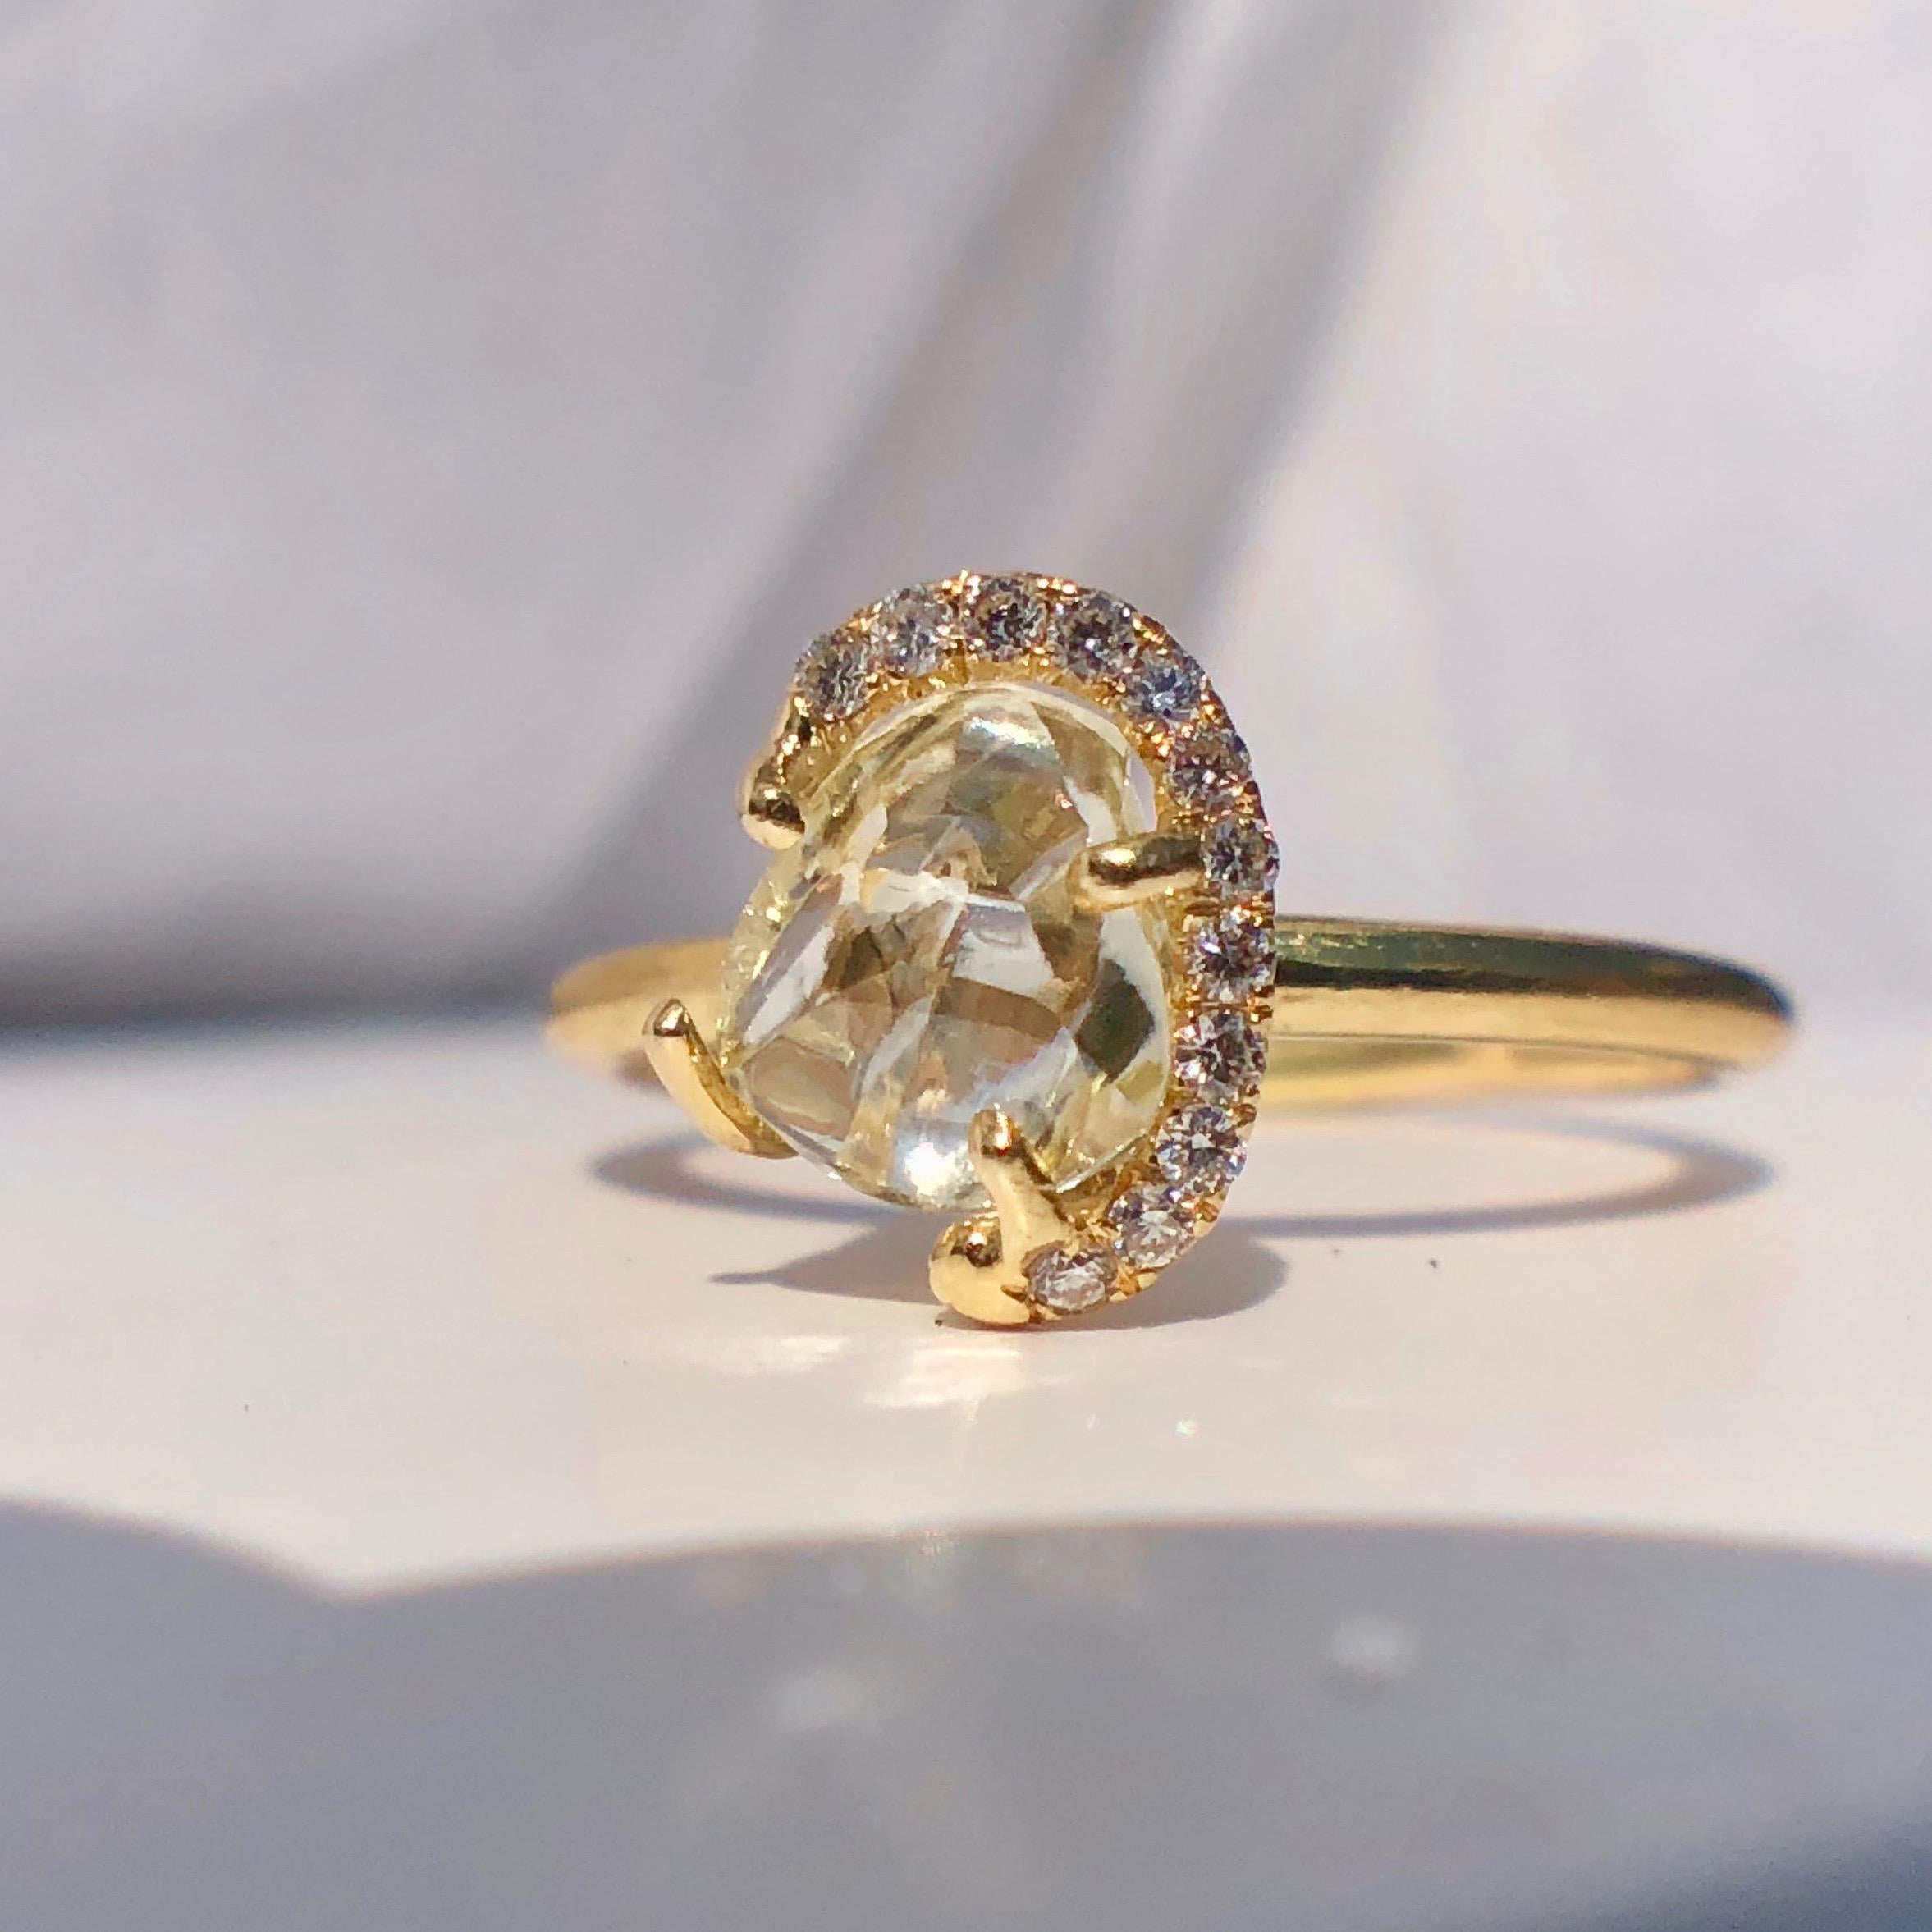 Very Pretty and Wearable Ring From the Wonderful Design Company 'DIAMOND IN THE ROUGH'

An 18 Karat Yellow Gold, Rough Diamond and Diamond Ring by 'Diamond in the Rough' 

A ring containing one rough diamond weighing approximately 1.24 carats and 12